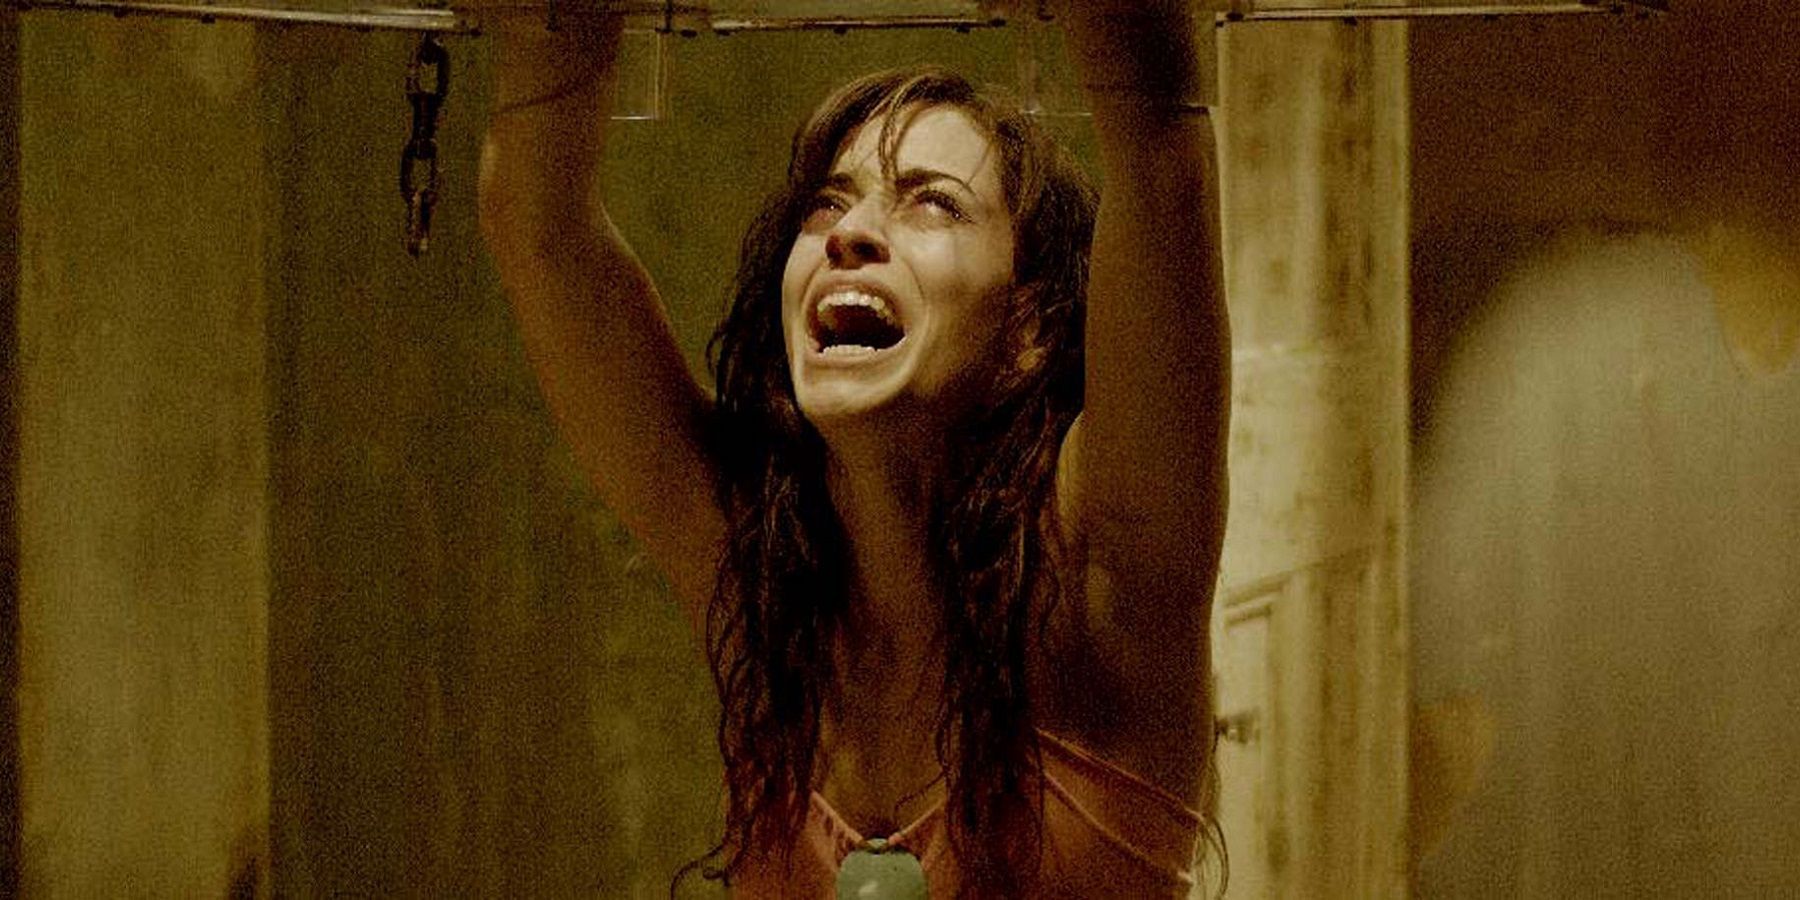 Addison screaming in Saw 2